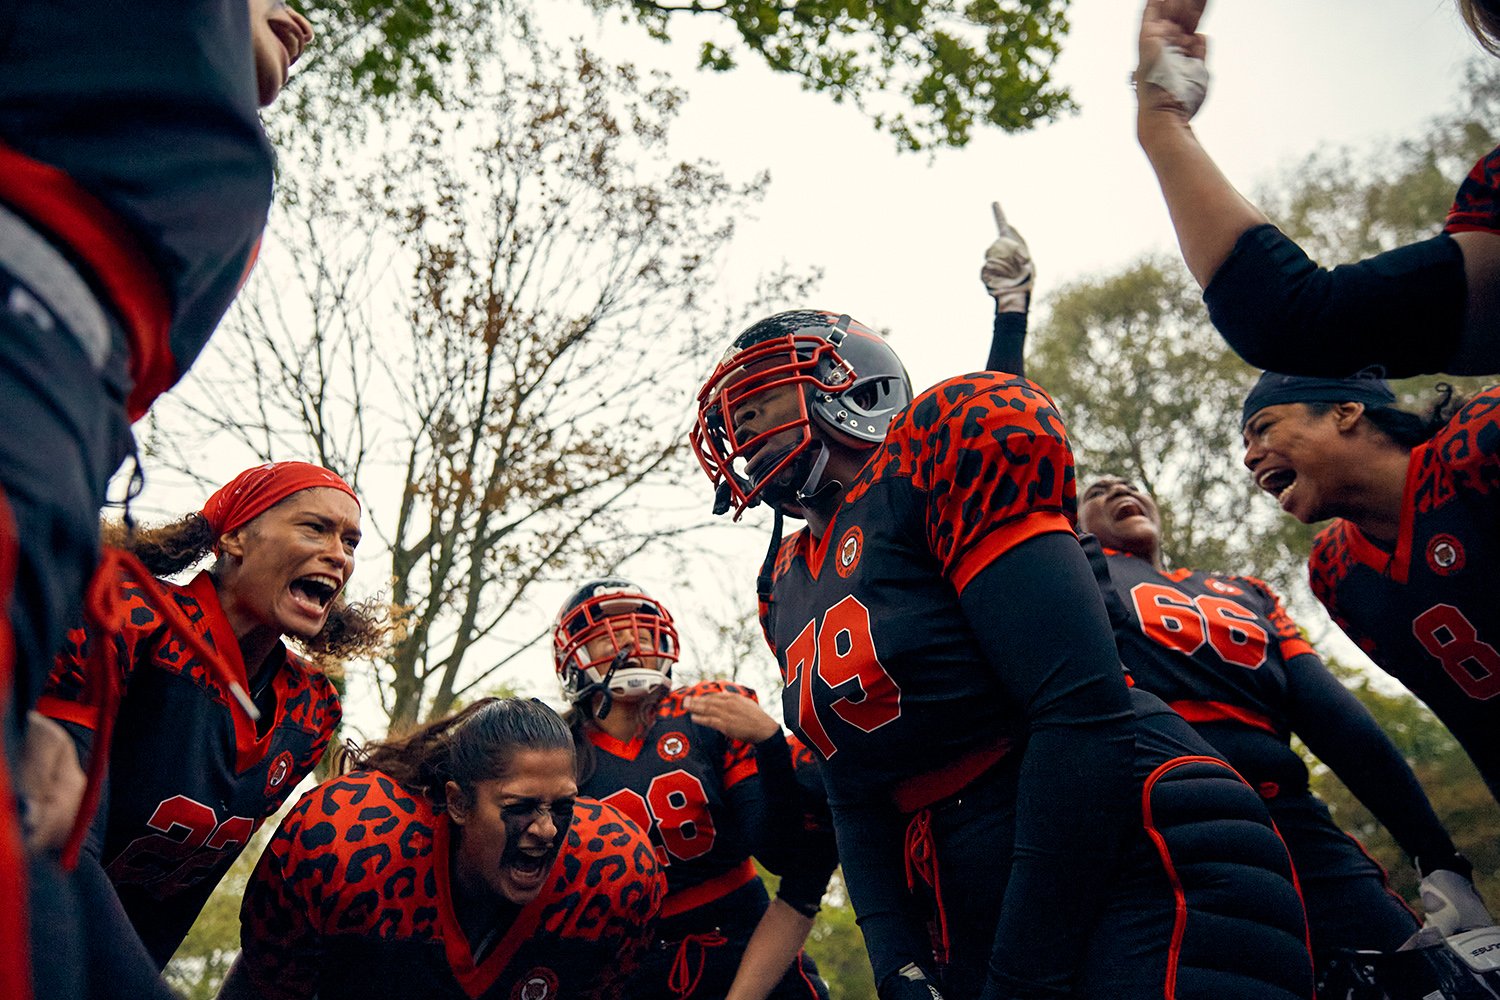  Offensive line player Wenna (center with helmet) leads her team mates during a pre-game cheer against the Rotterdam Ravens, Amsterdam, NL, 2020. 